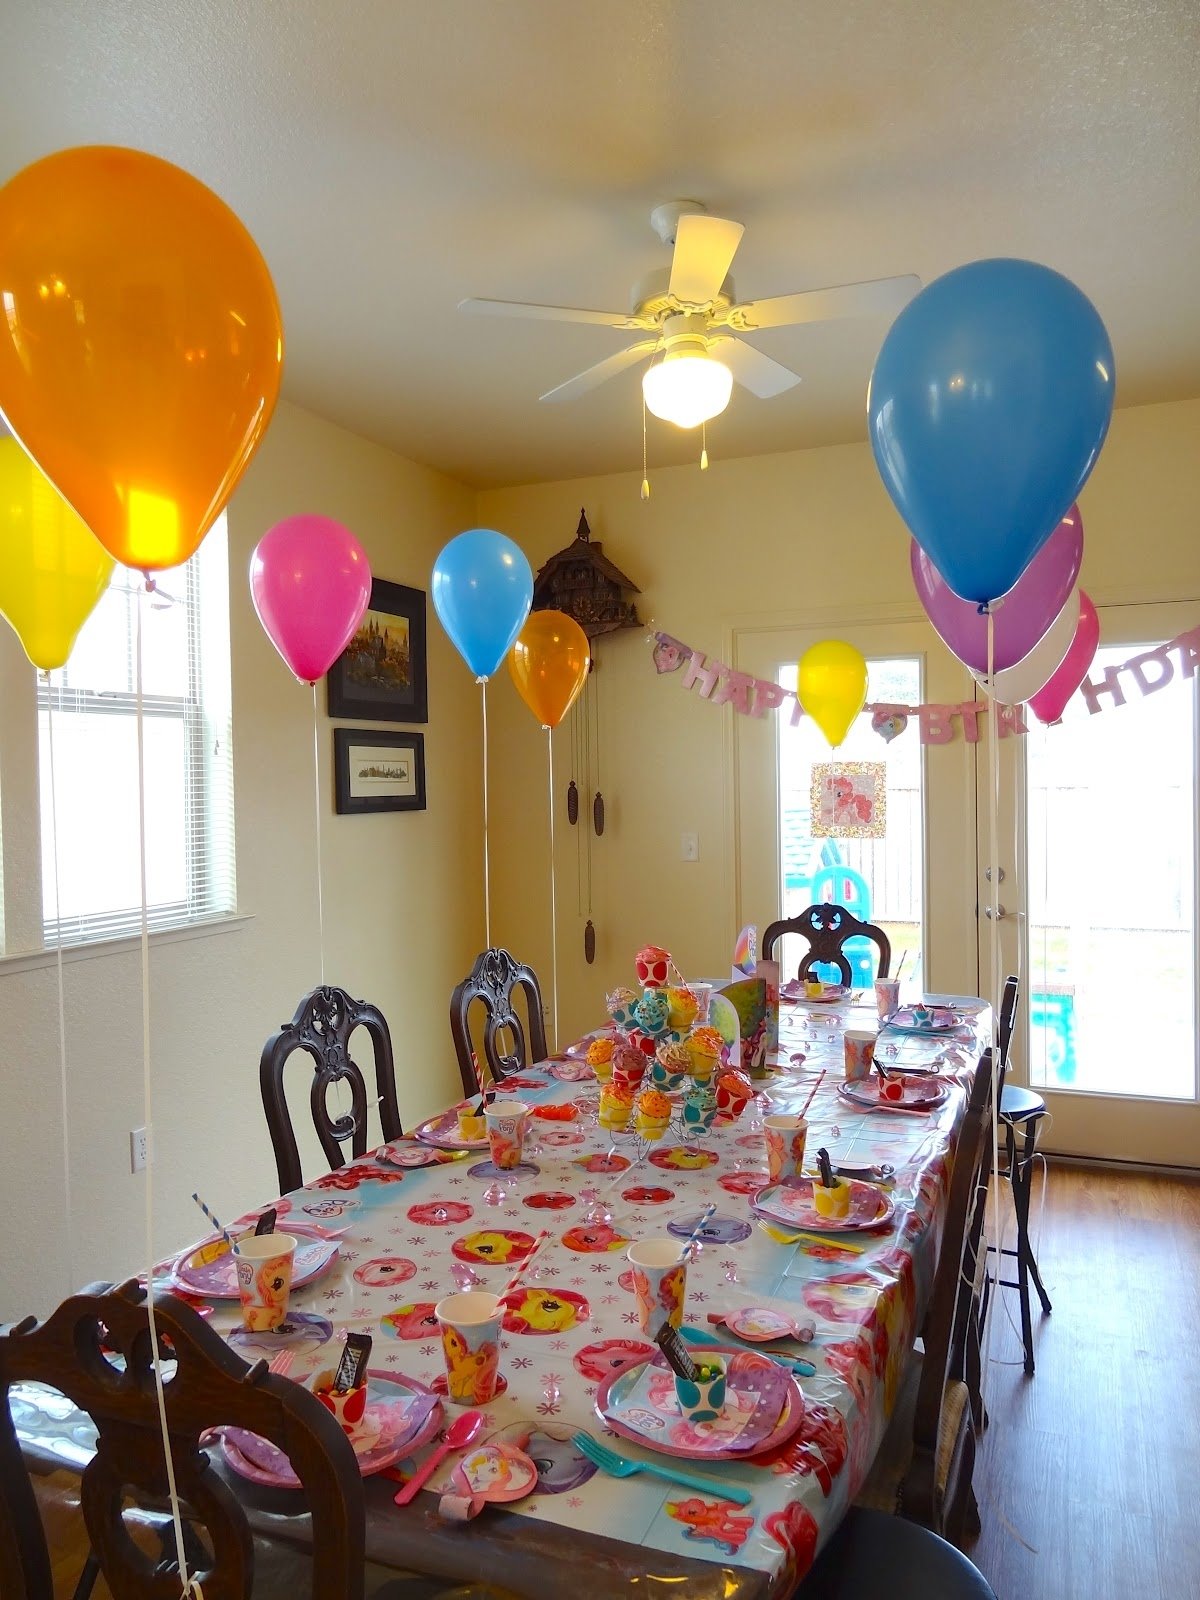 10 Great Birthday Party Ideas For 4 Year Old welcome to the krazy kingdom tayas 5th birthday party my little pony 6 2022